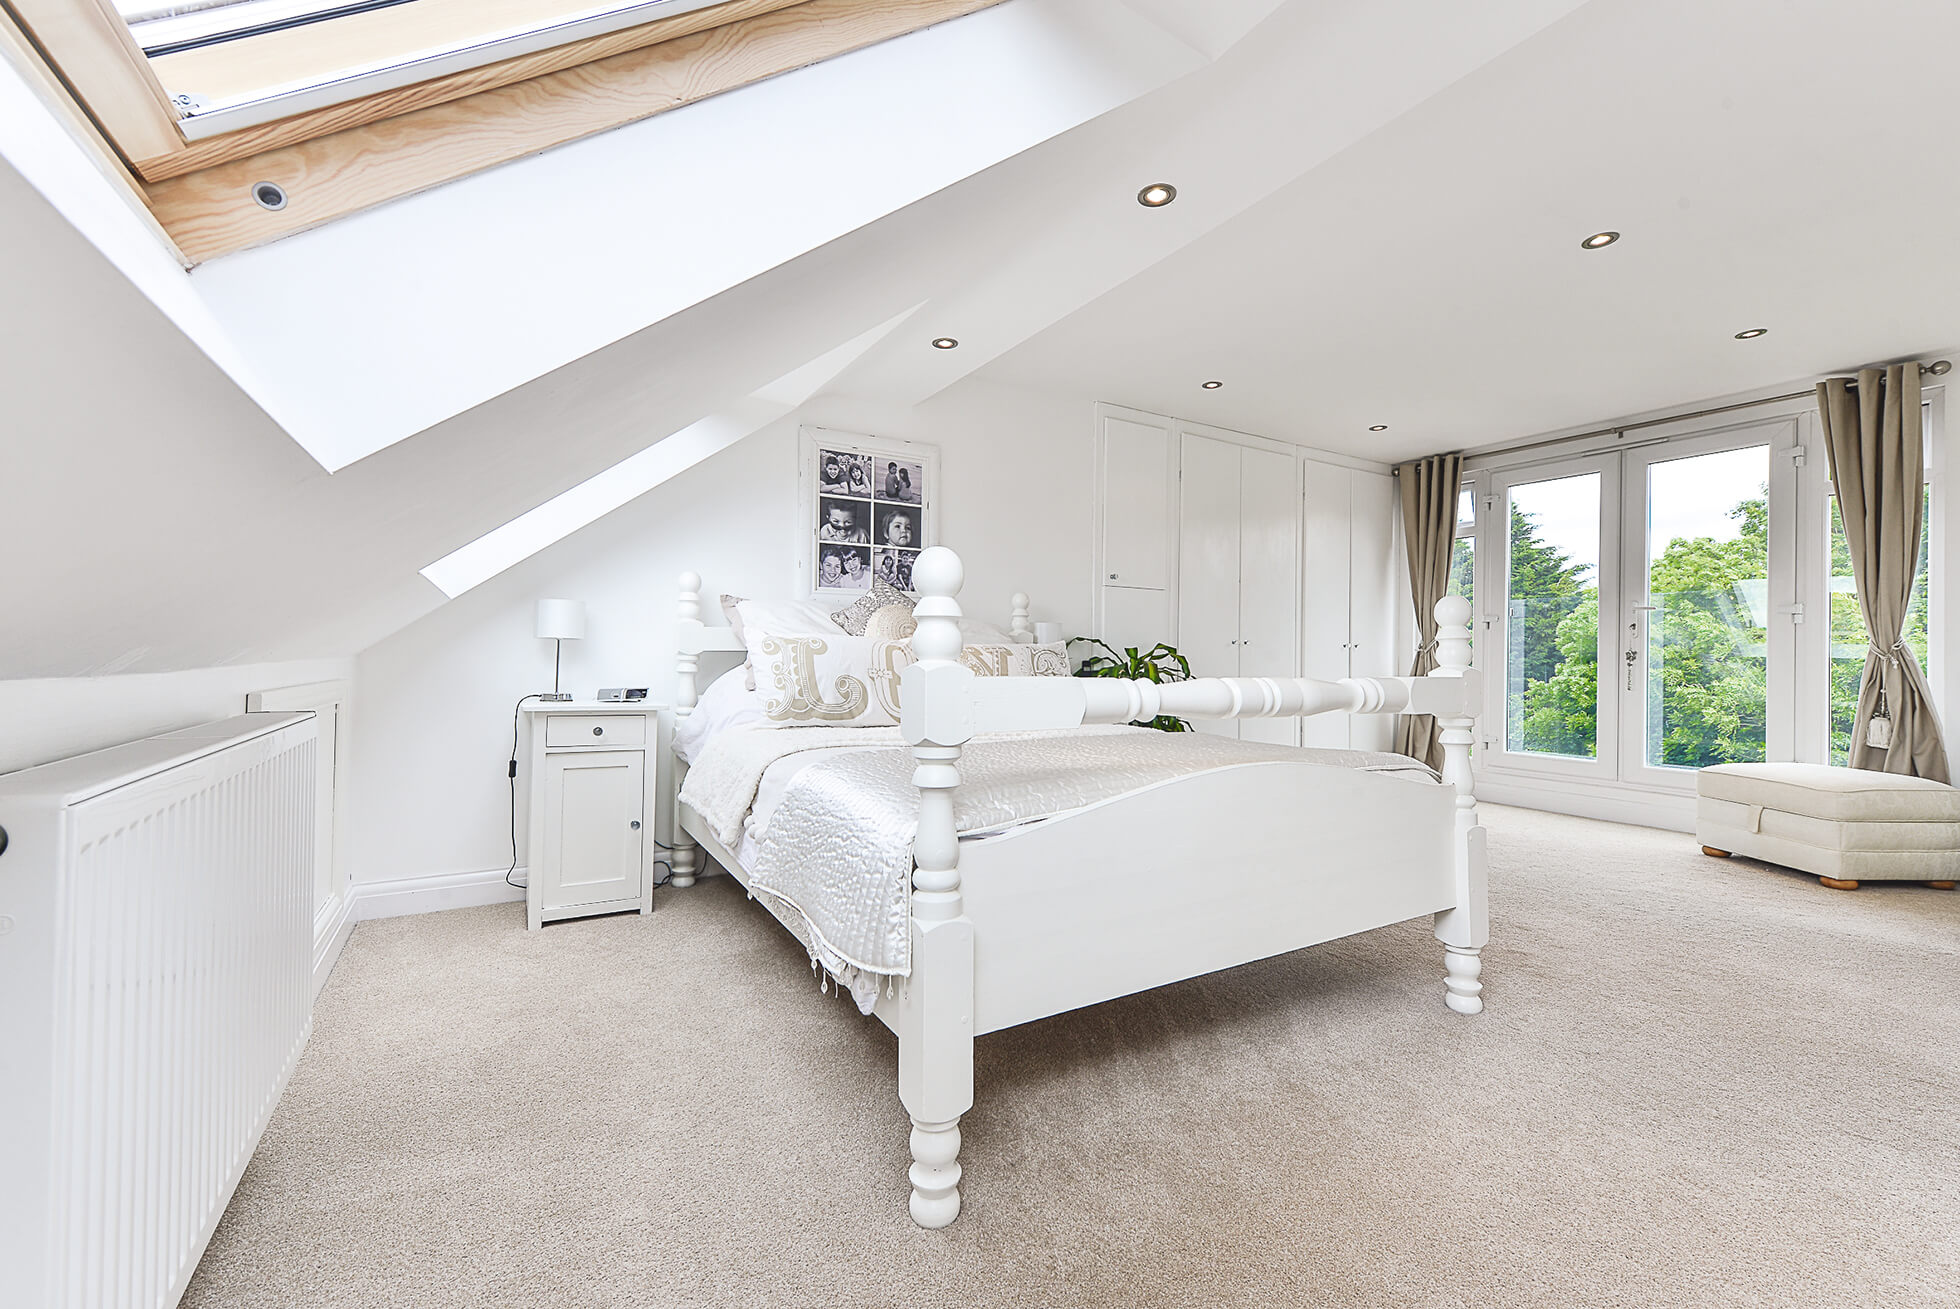 Do you have a question about converting your Loft in Harpenden? Here are the most popular questions asked by our clients.